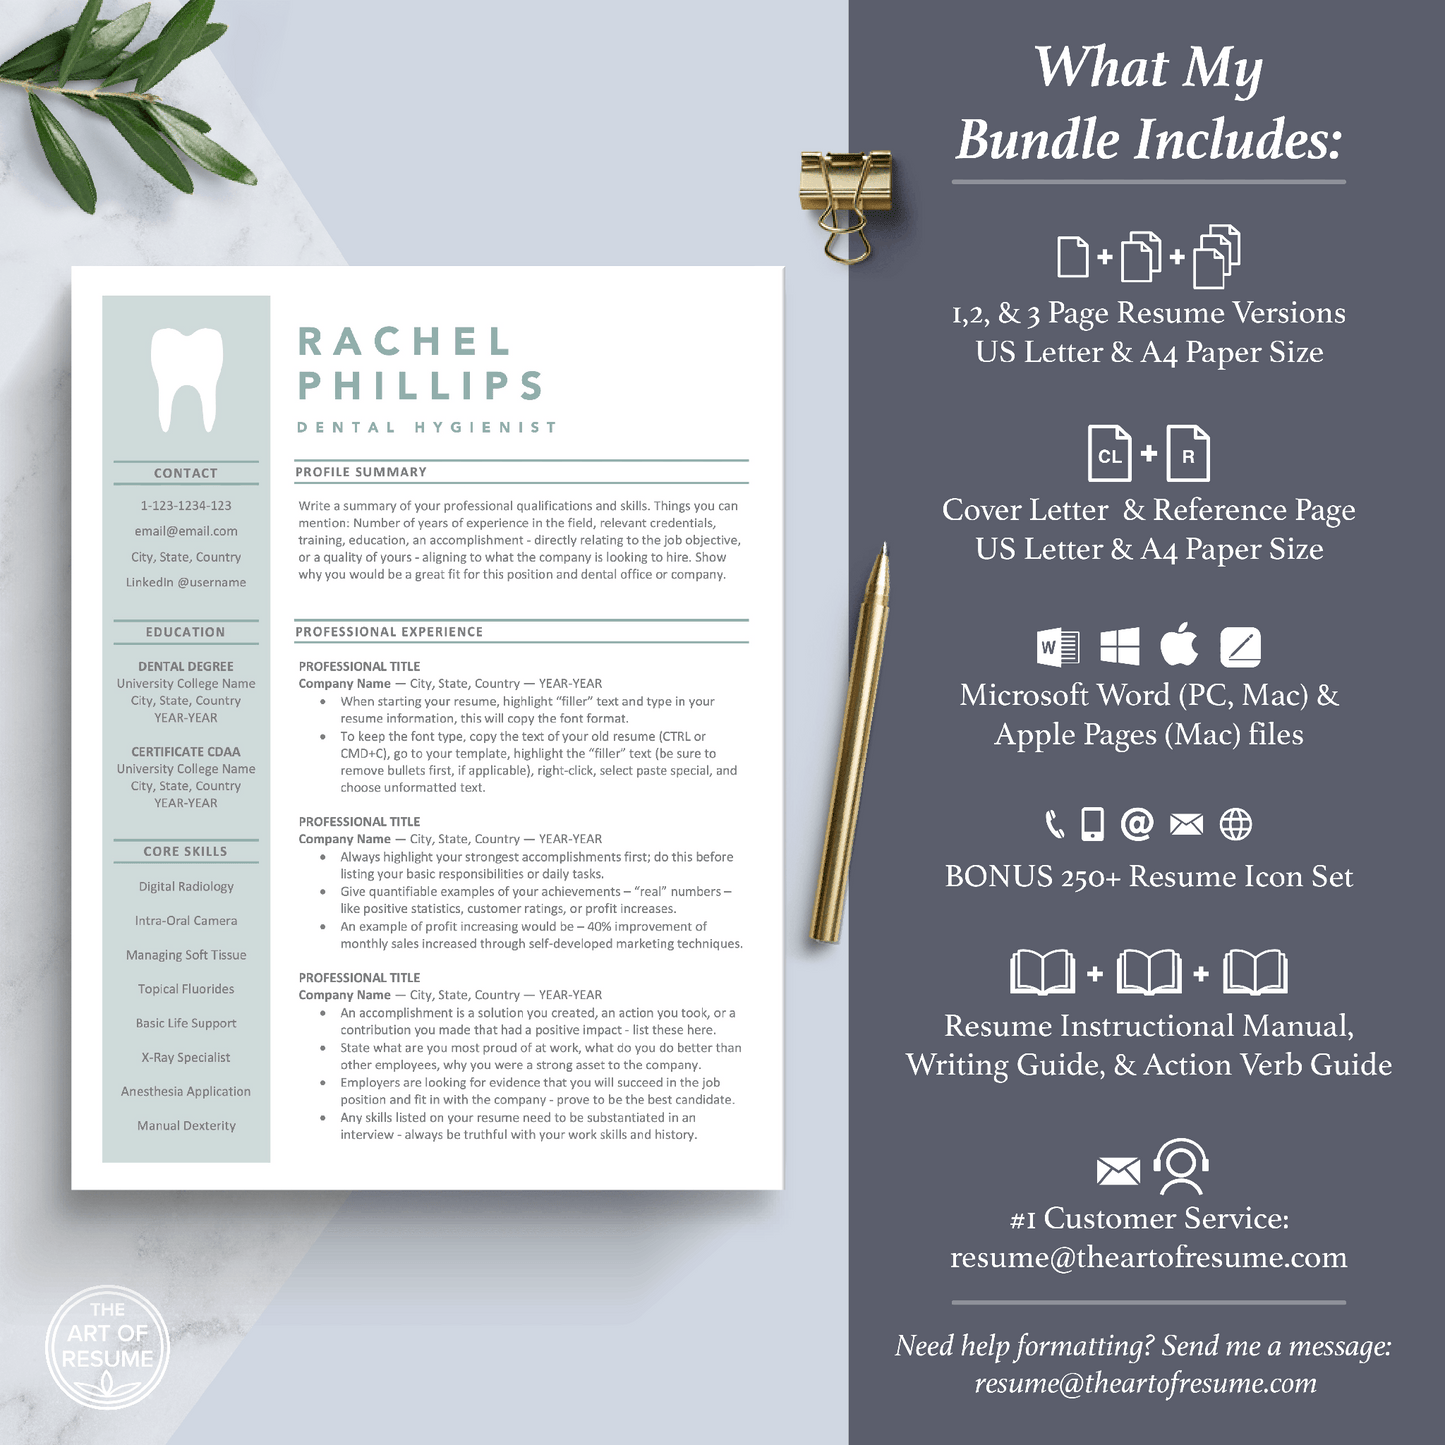 The Art of Resume Templates | Dentist, Hygienist, Dental Student, Assistant Resume CV Template Maker 3, Cover Letter, Reference Page, Mac, PC, A4 Paper, US size, Free Guide, The Art of Resume Writing, 250 Bonus Resume Icons